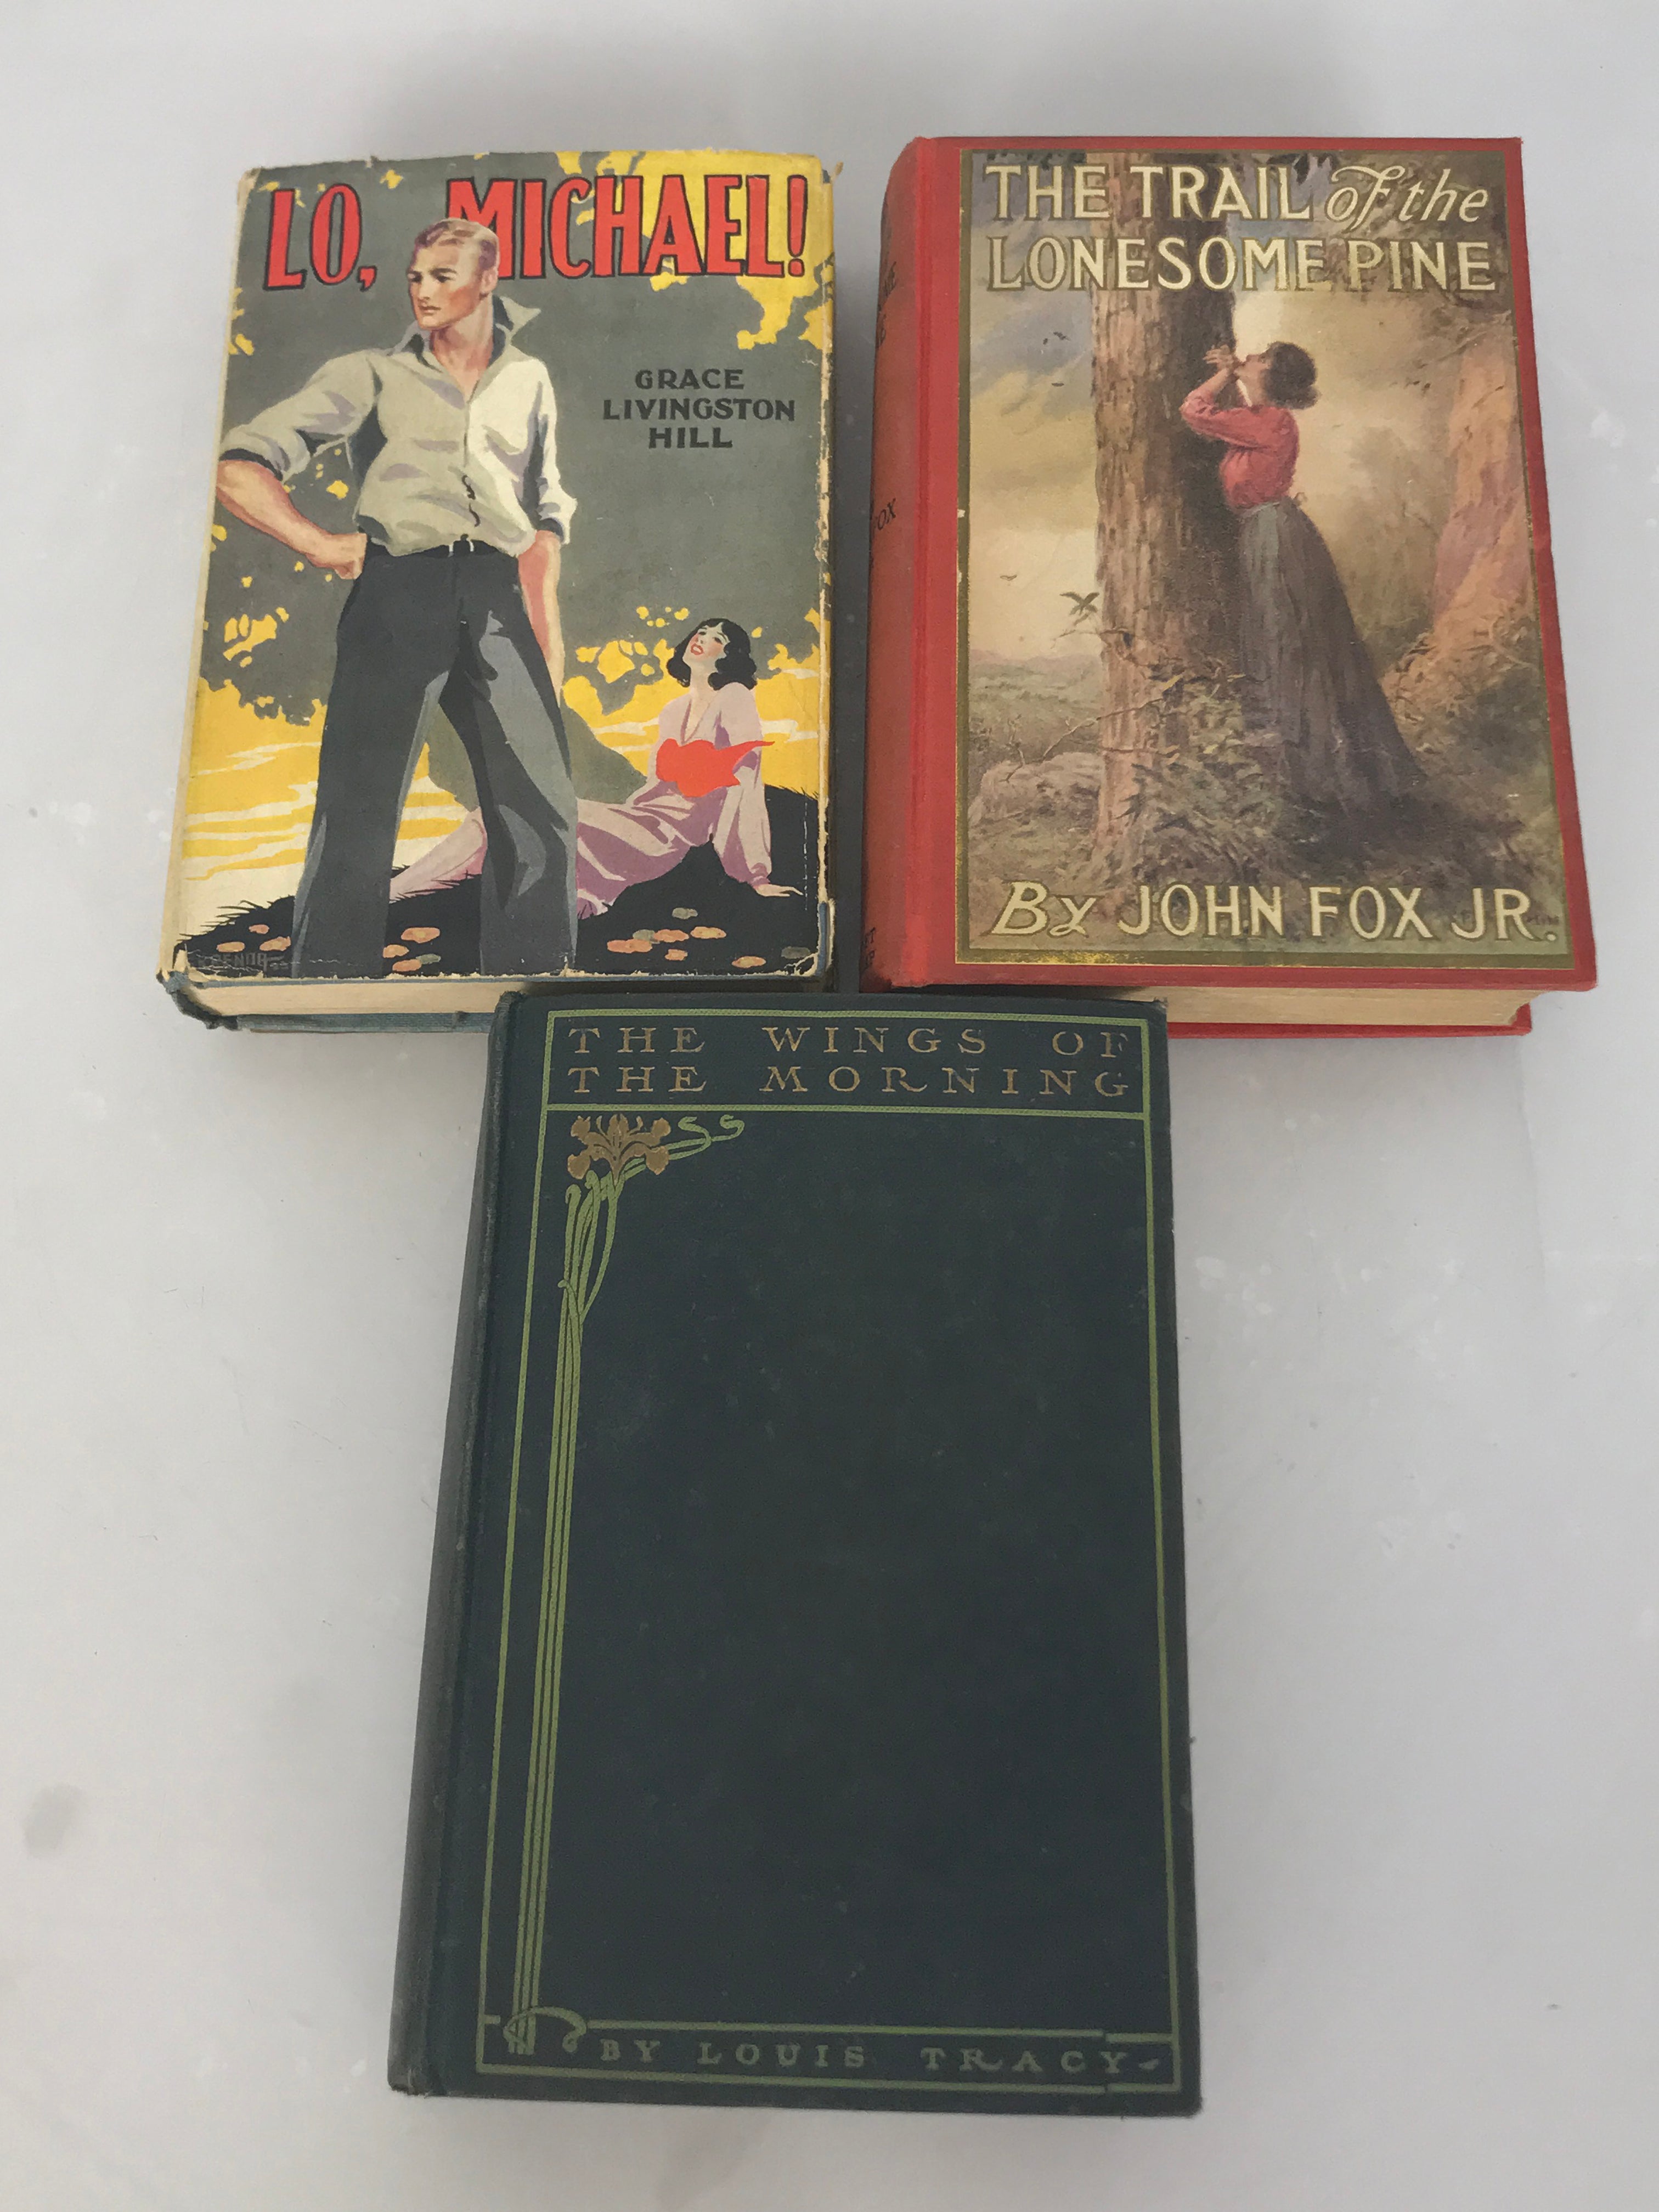 Lot of 3 Antique Romance Novels: Lo, Michael!, The Trail of the Lonesome Pine, and The Wings of the Morning 1903-1913 HC